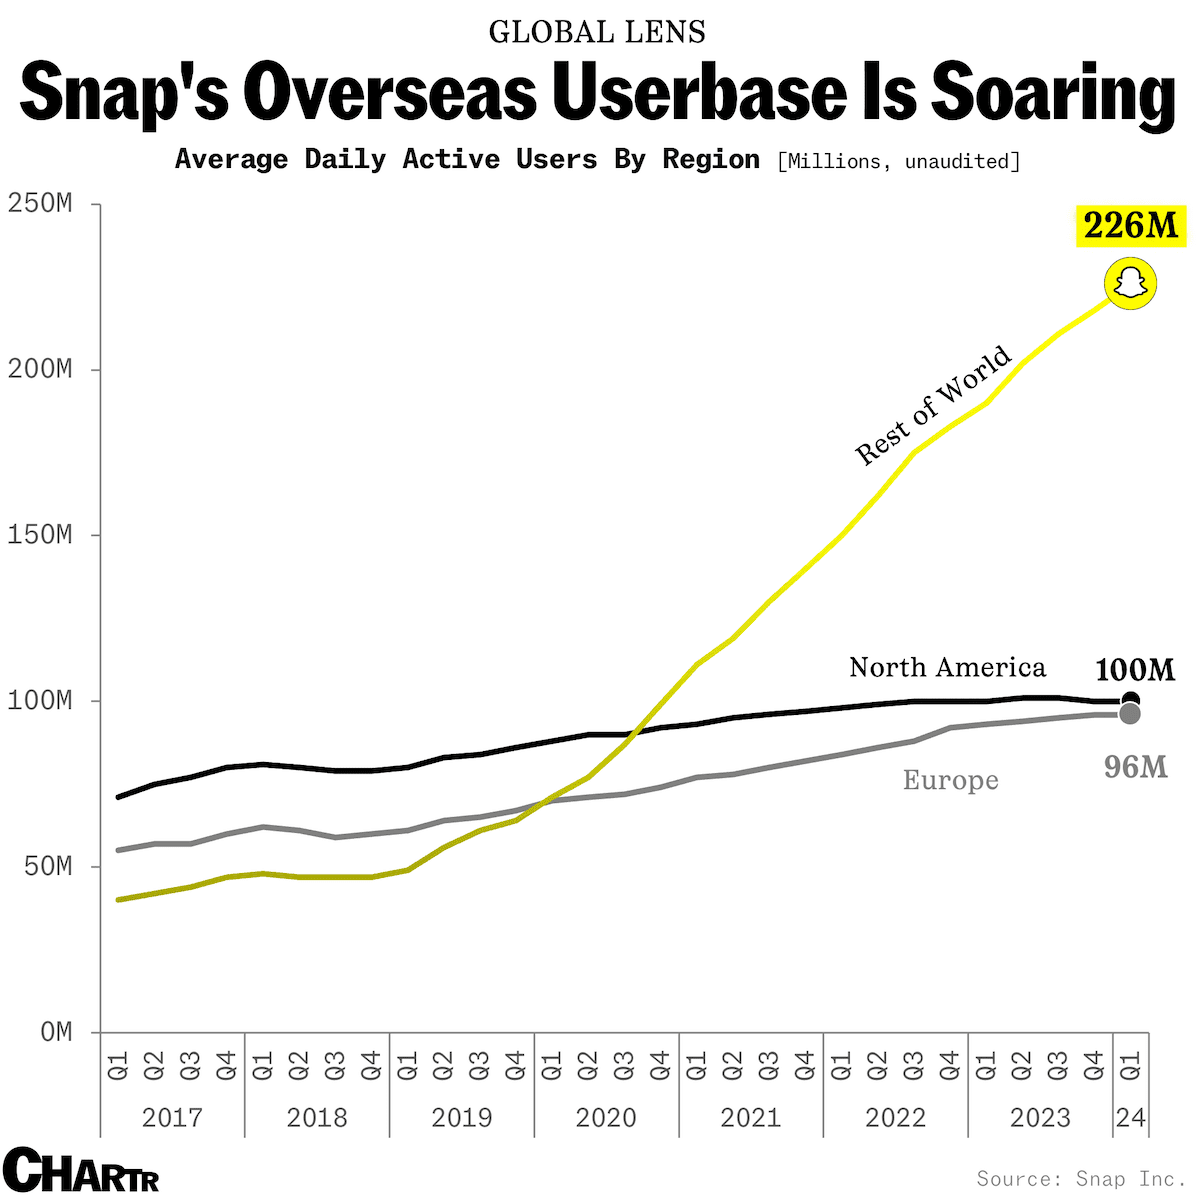 Shares of Snap Inc., the company behind Snapchat, are up more than 30% in the last last week after posting better-than-expected results for the most r